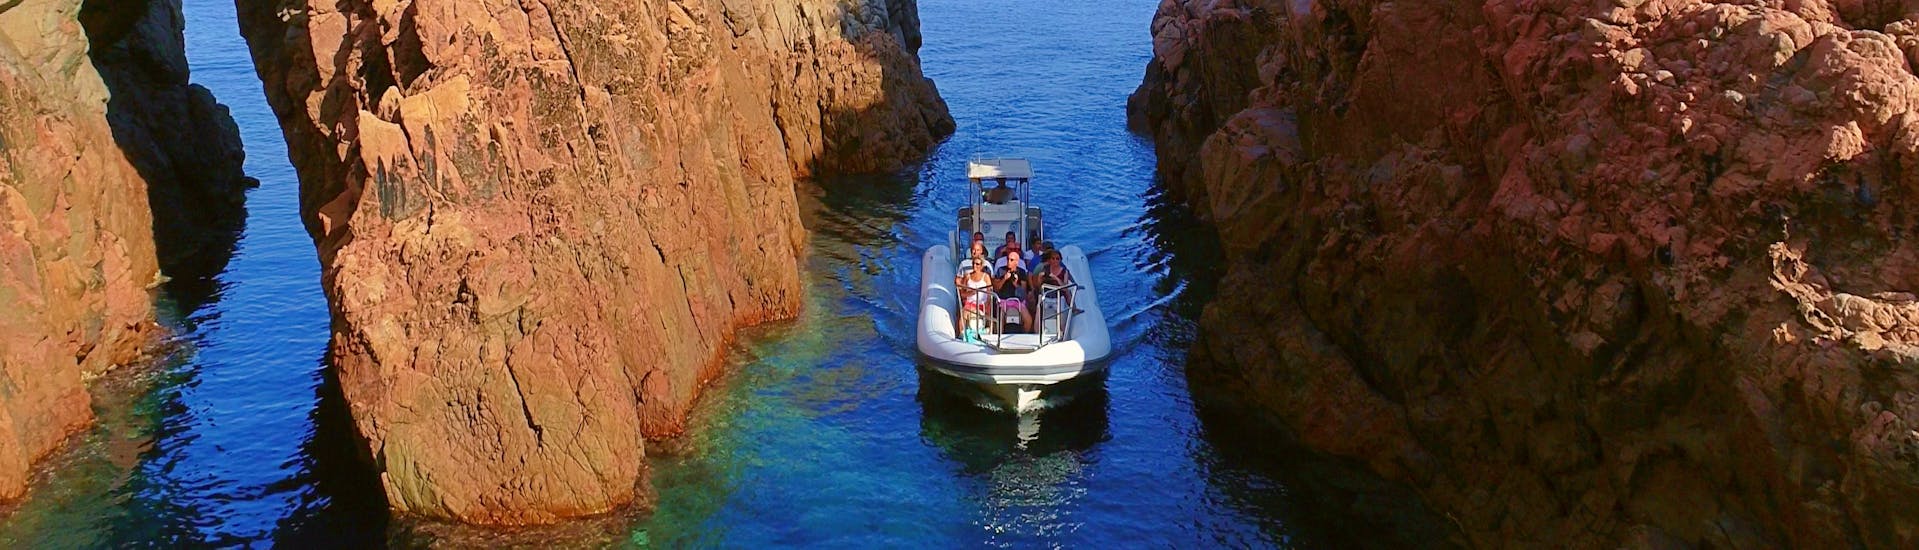 A family is doing a Semi-Private-Boat Trip to the Calanques de Piana from Cargèse with Croisière Grand Bleu Cargèse.